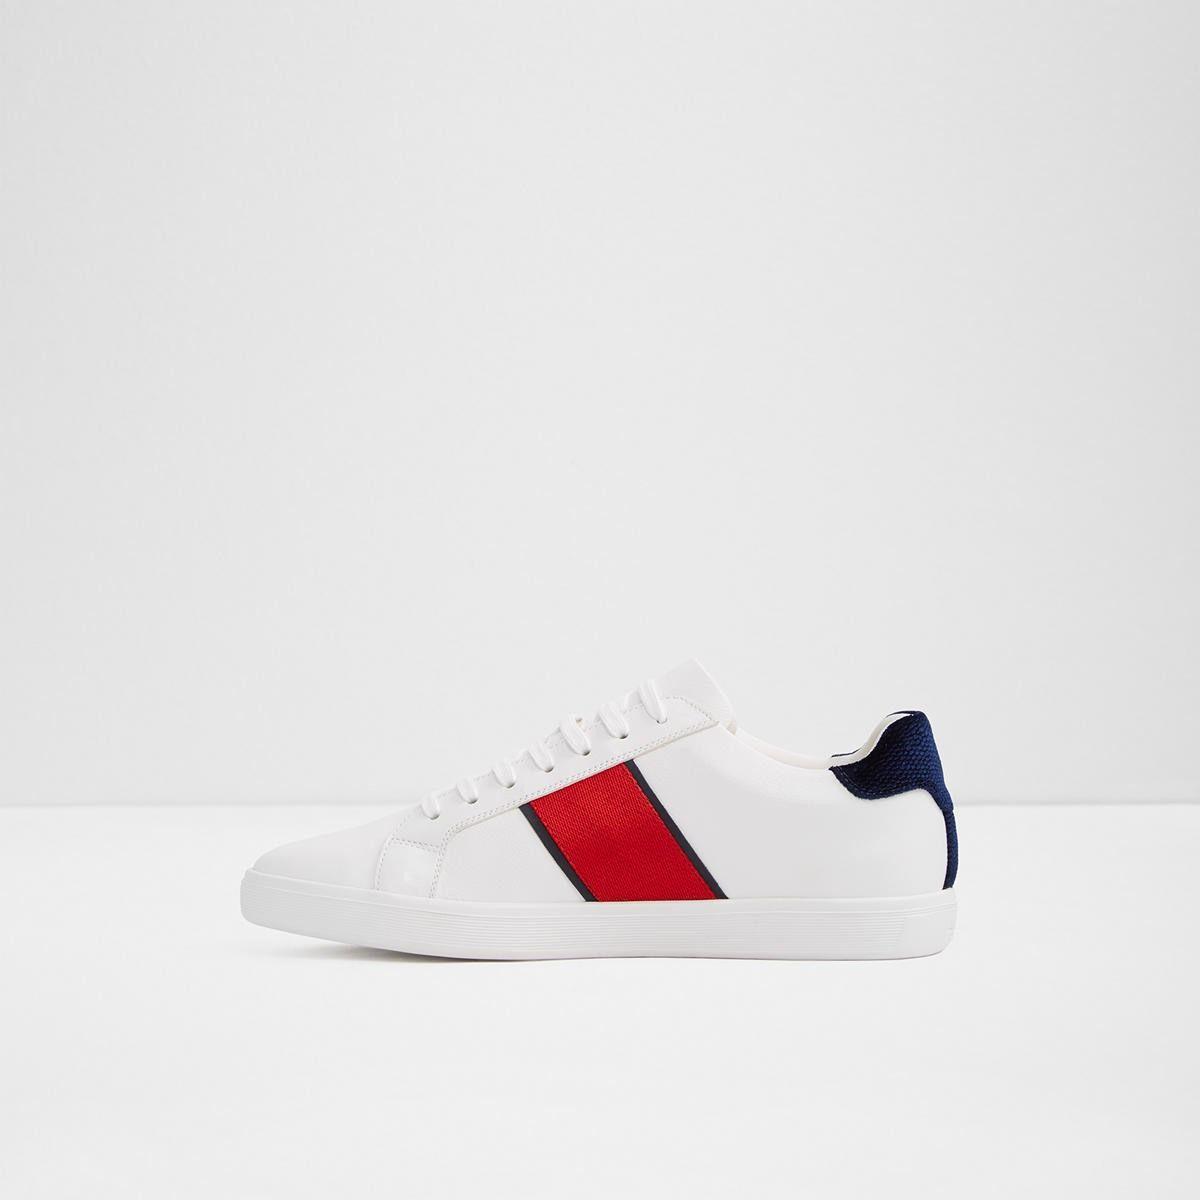 White and Red Shoe Logo - Cowien White Men's Sneakers | Aldoshoes.com US